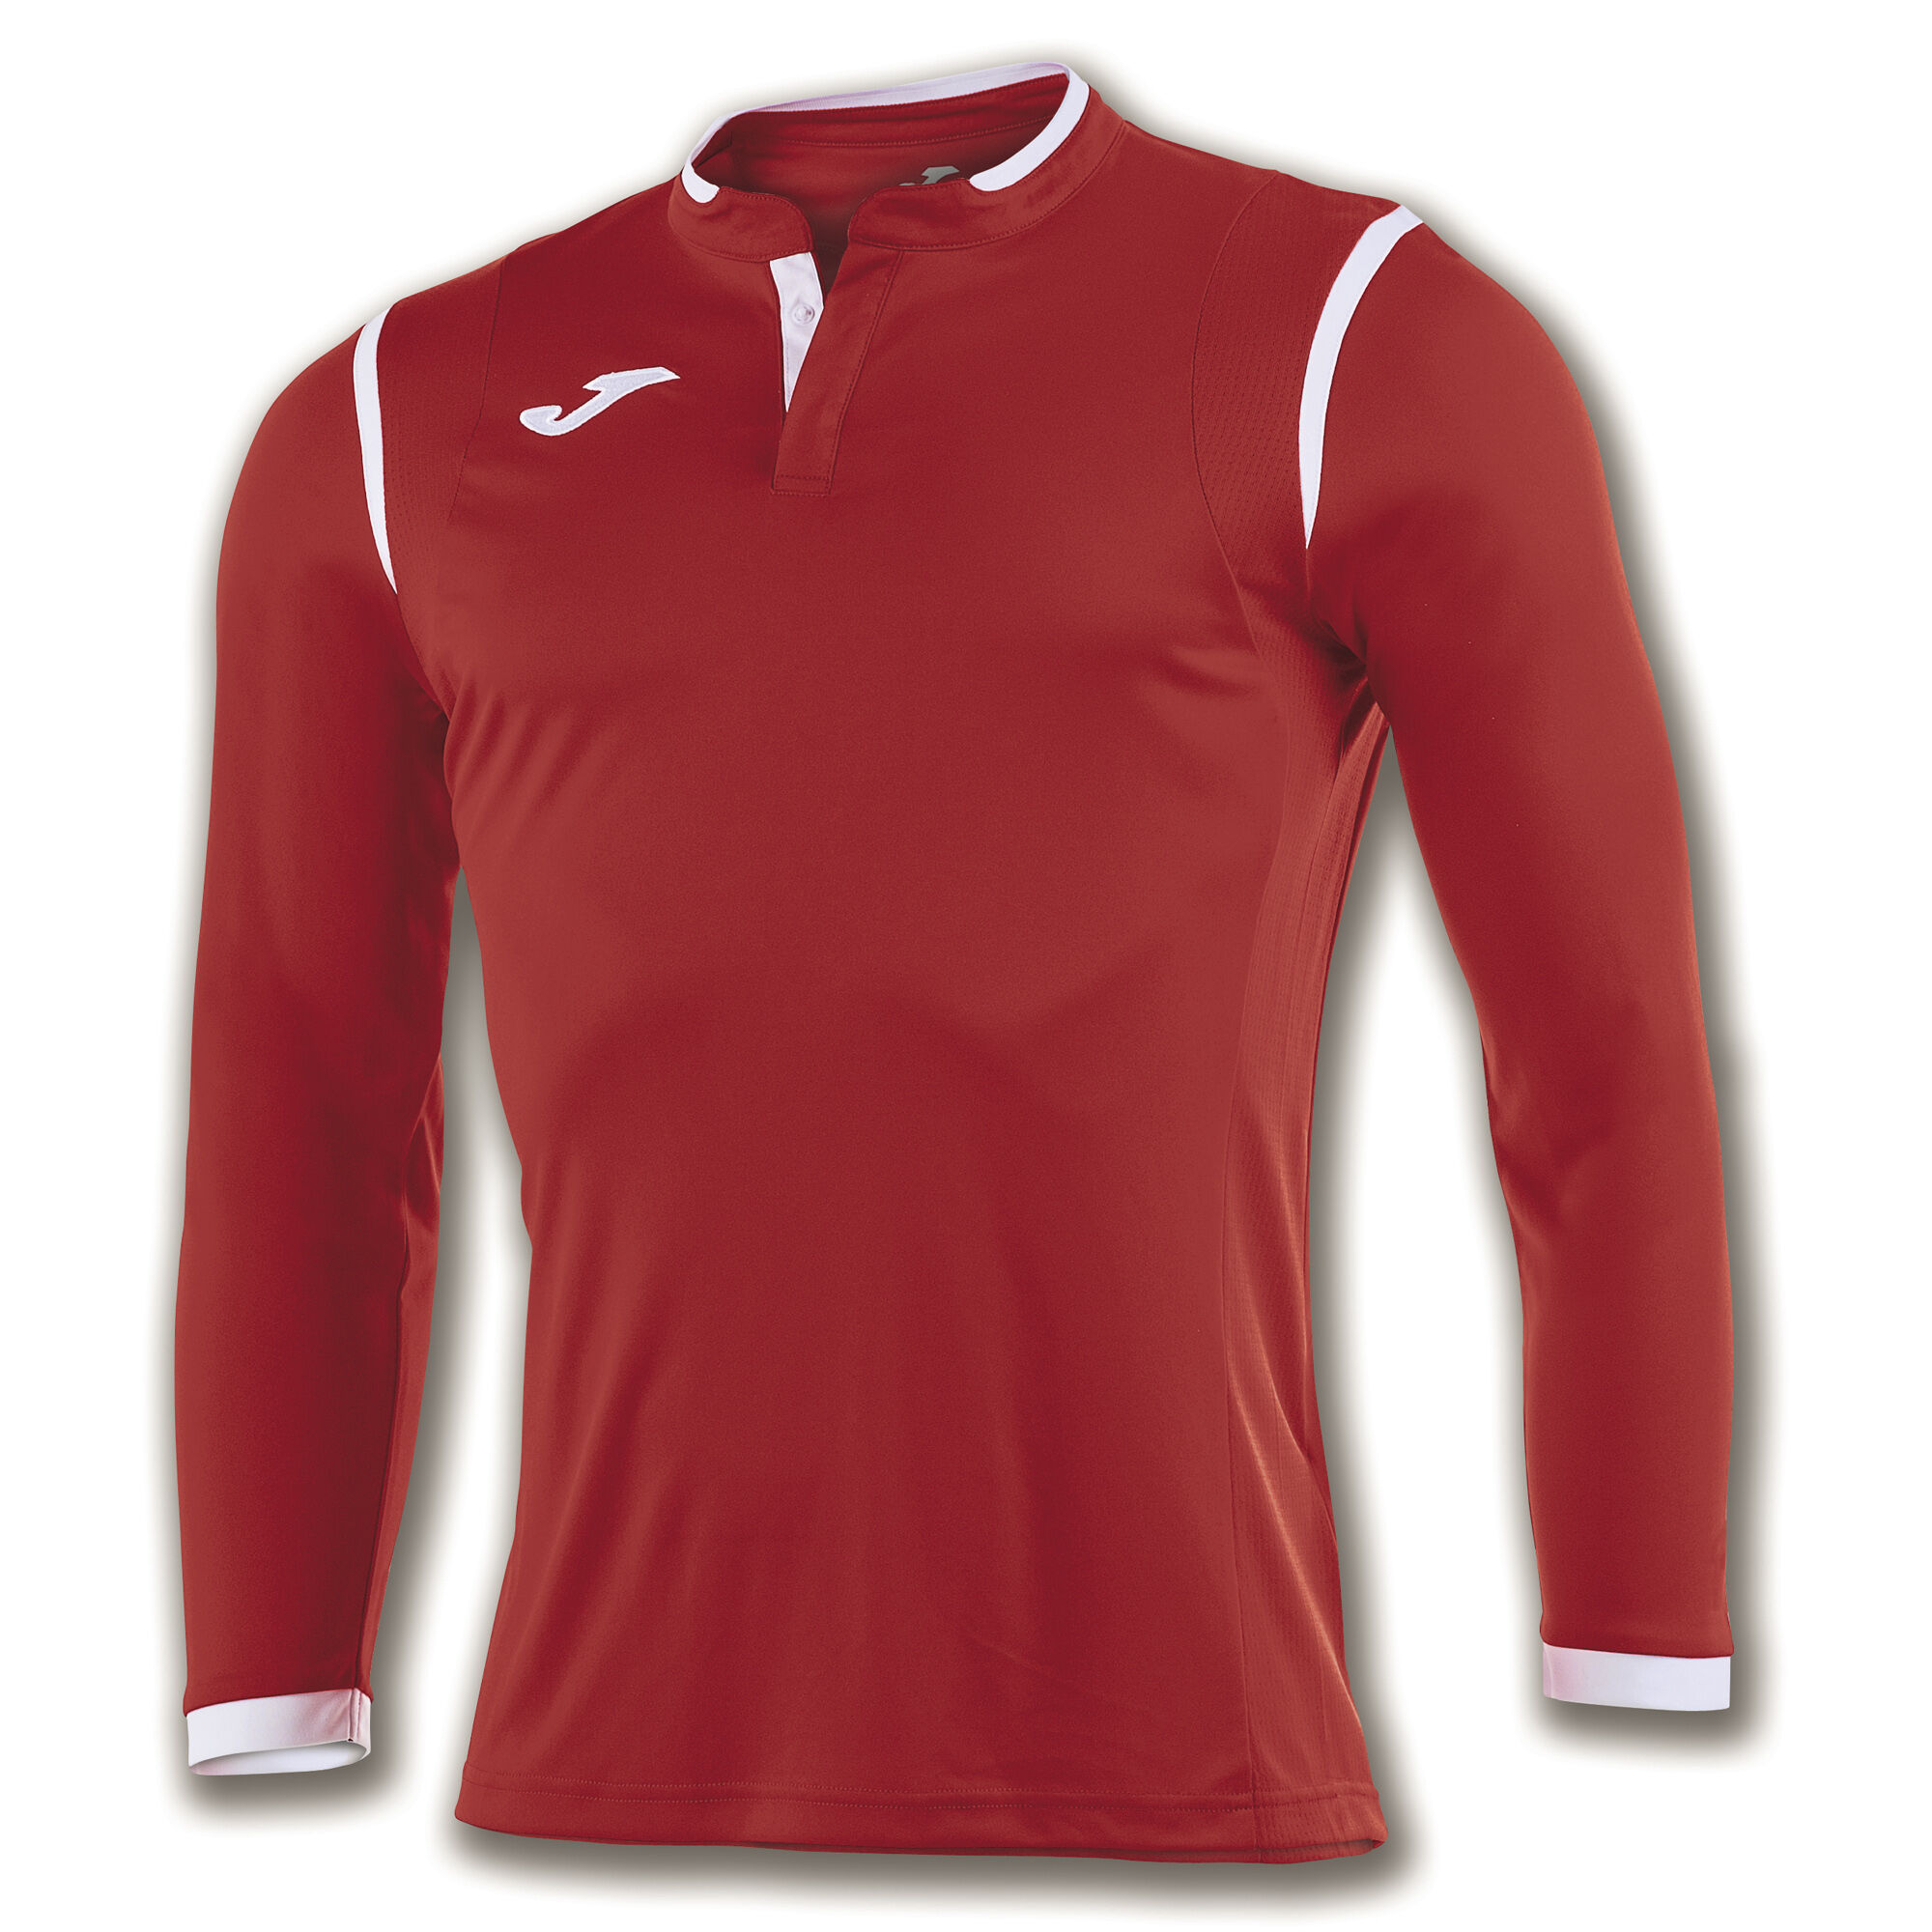 MAILLOT MANCHES LONGUES HOMME TOLETUM ROUGE BLANC